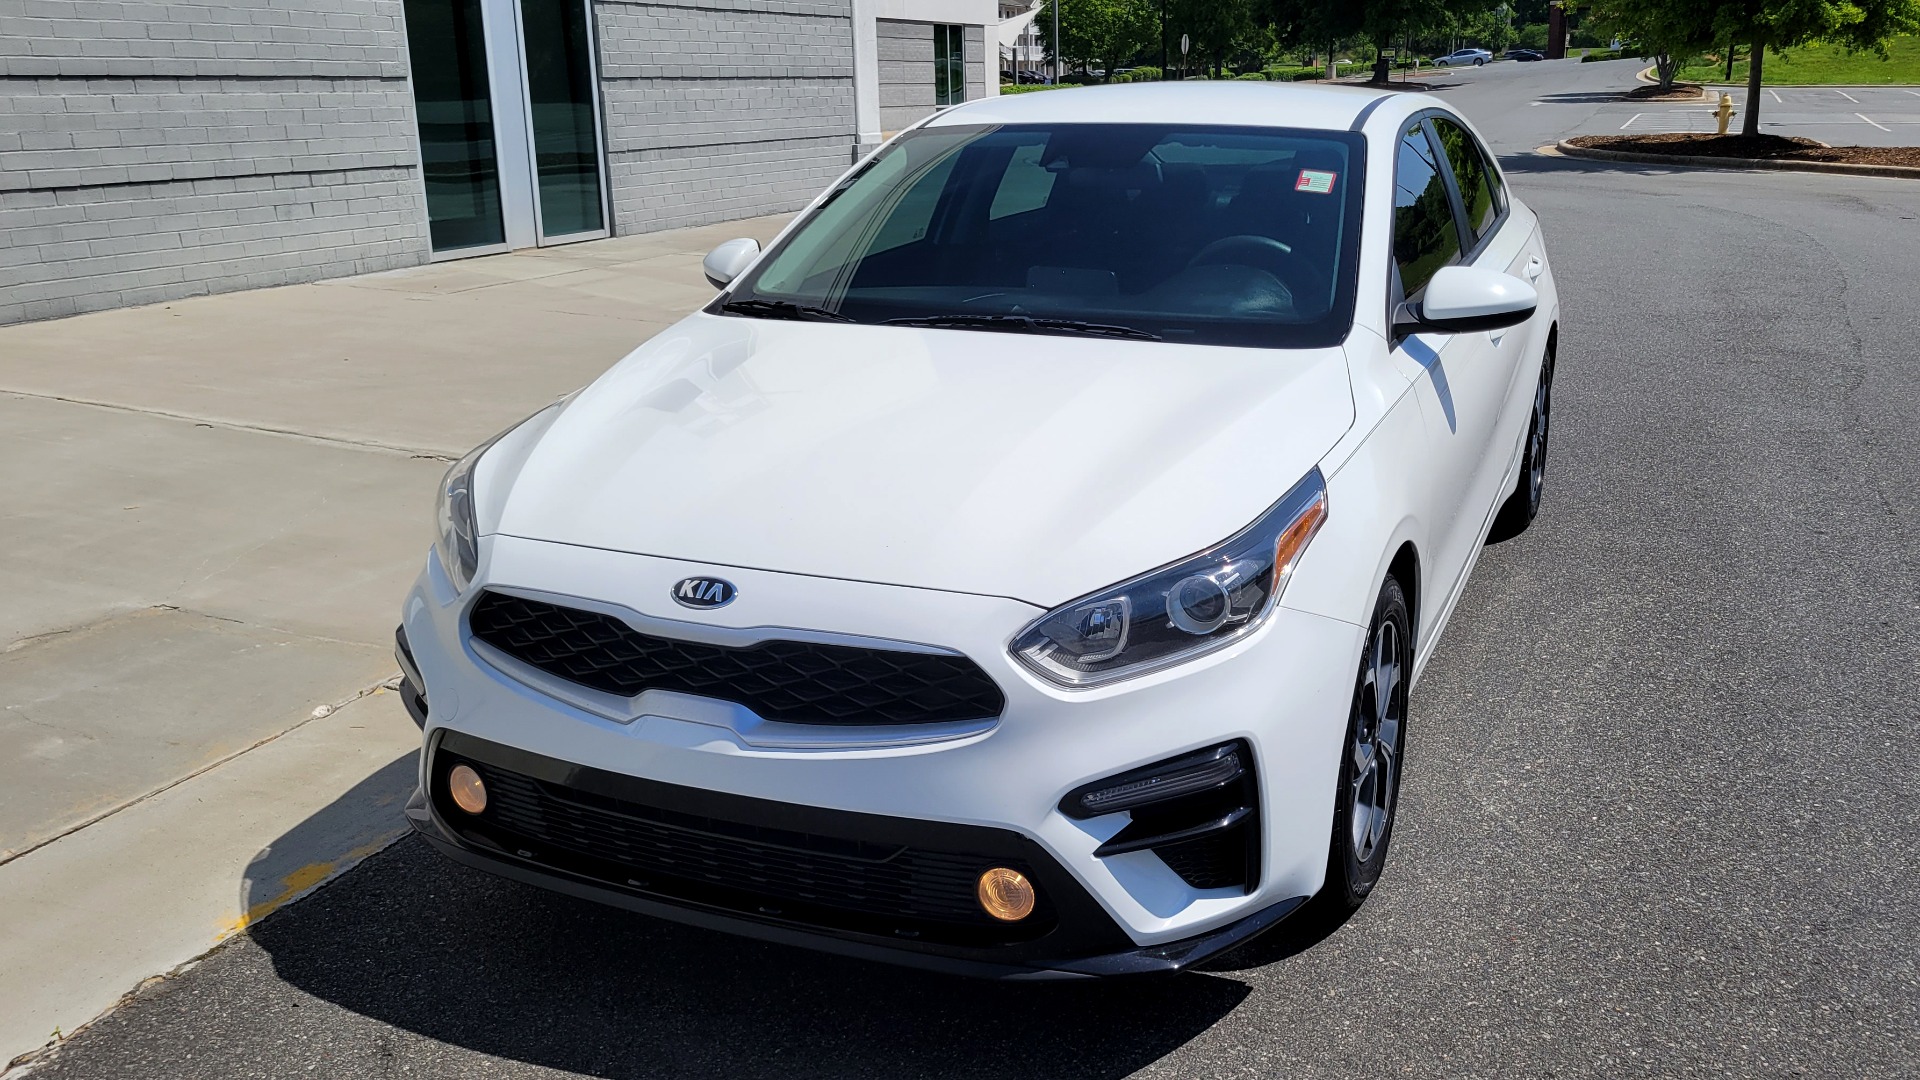 Used 2019 Kia FORTE LXS IVT 2.0L SEDAN / CVT TRANS / APPLE / DUAL-ZONE AIR / REARVIEW for sale $16,995 at Formula Imports in Charlotte NC 28227 2